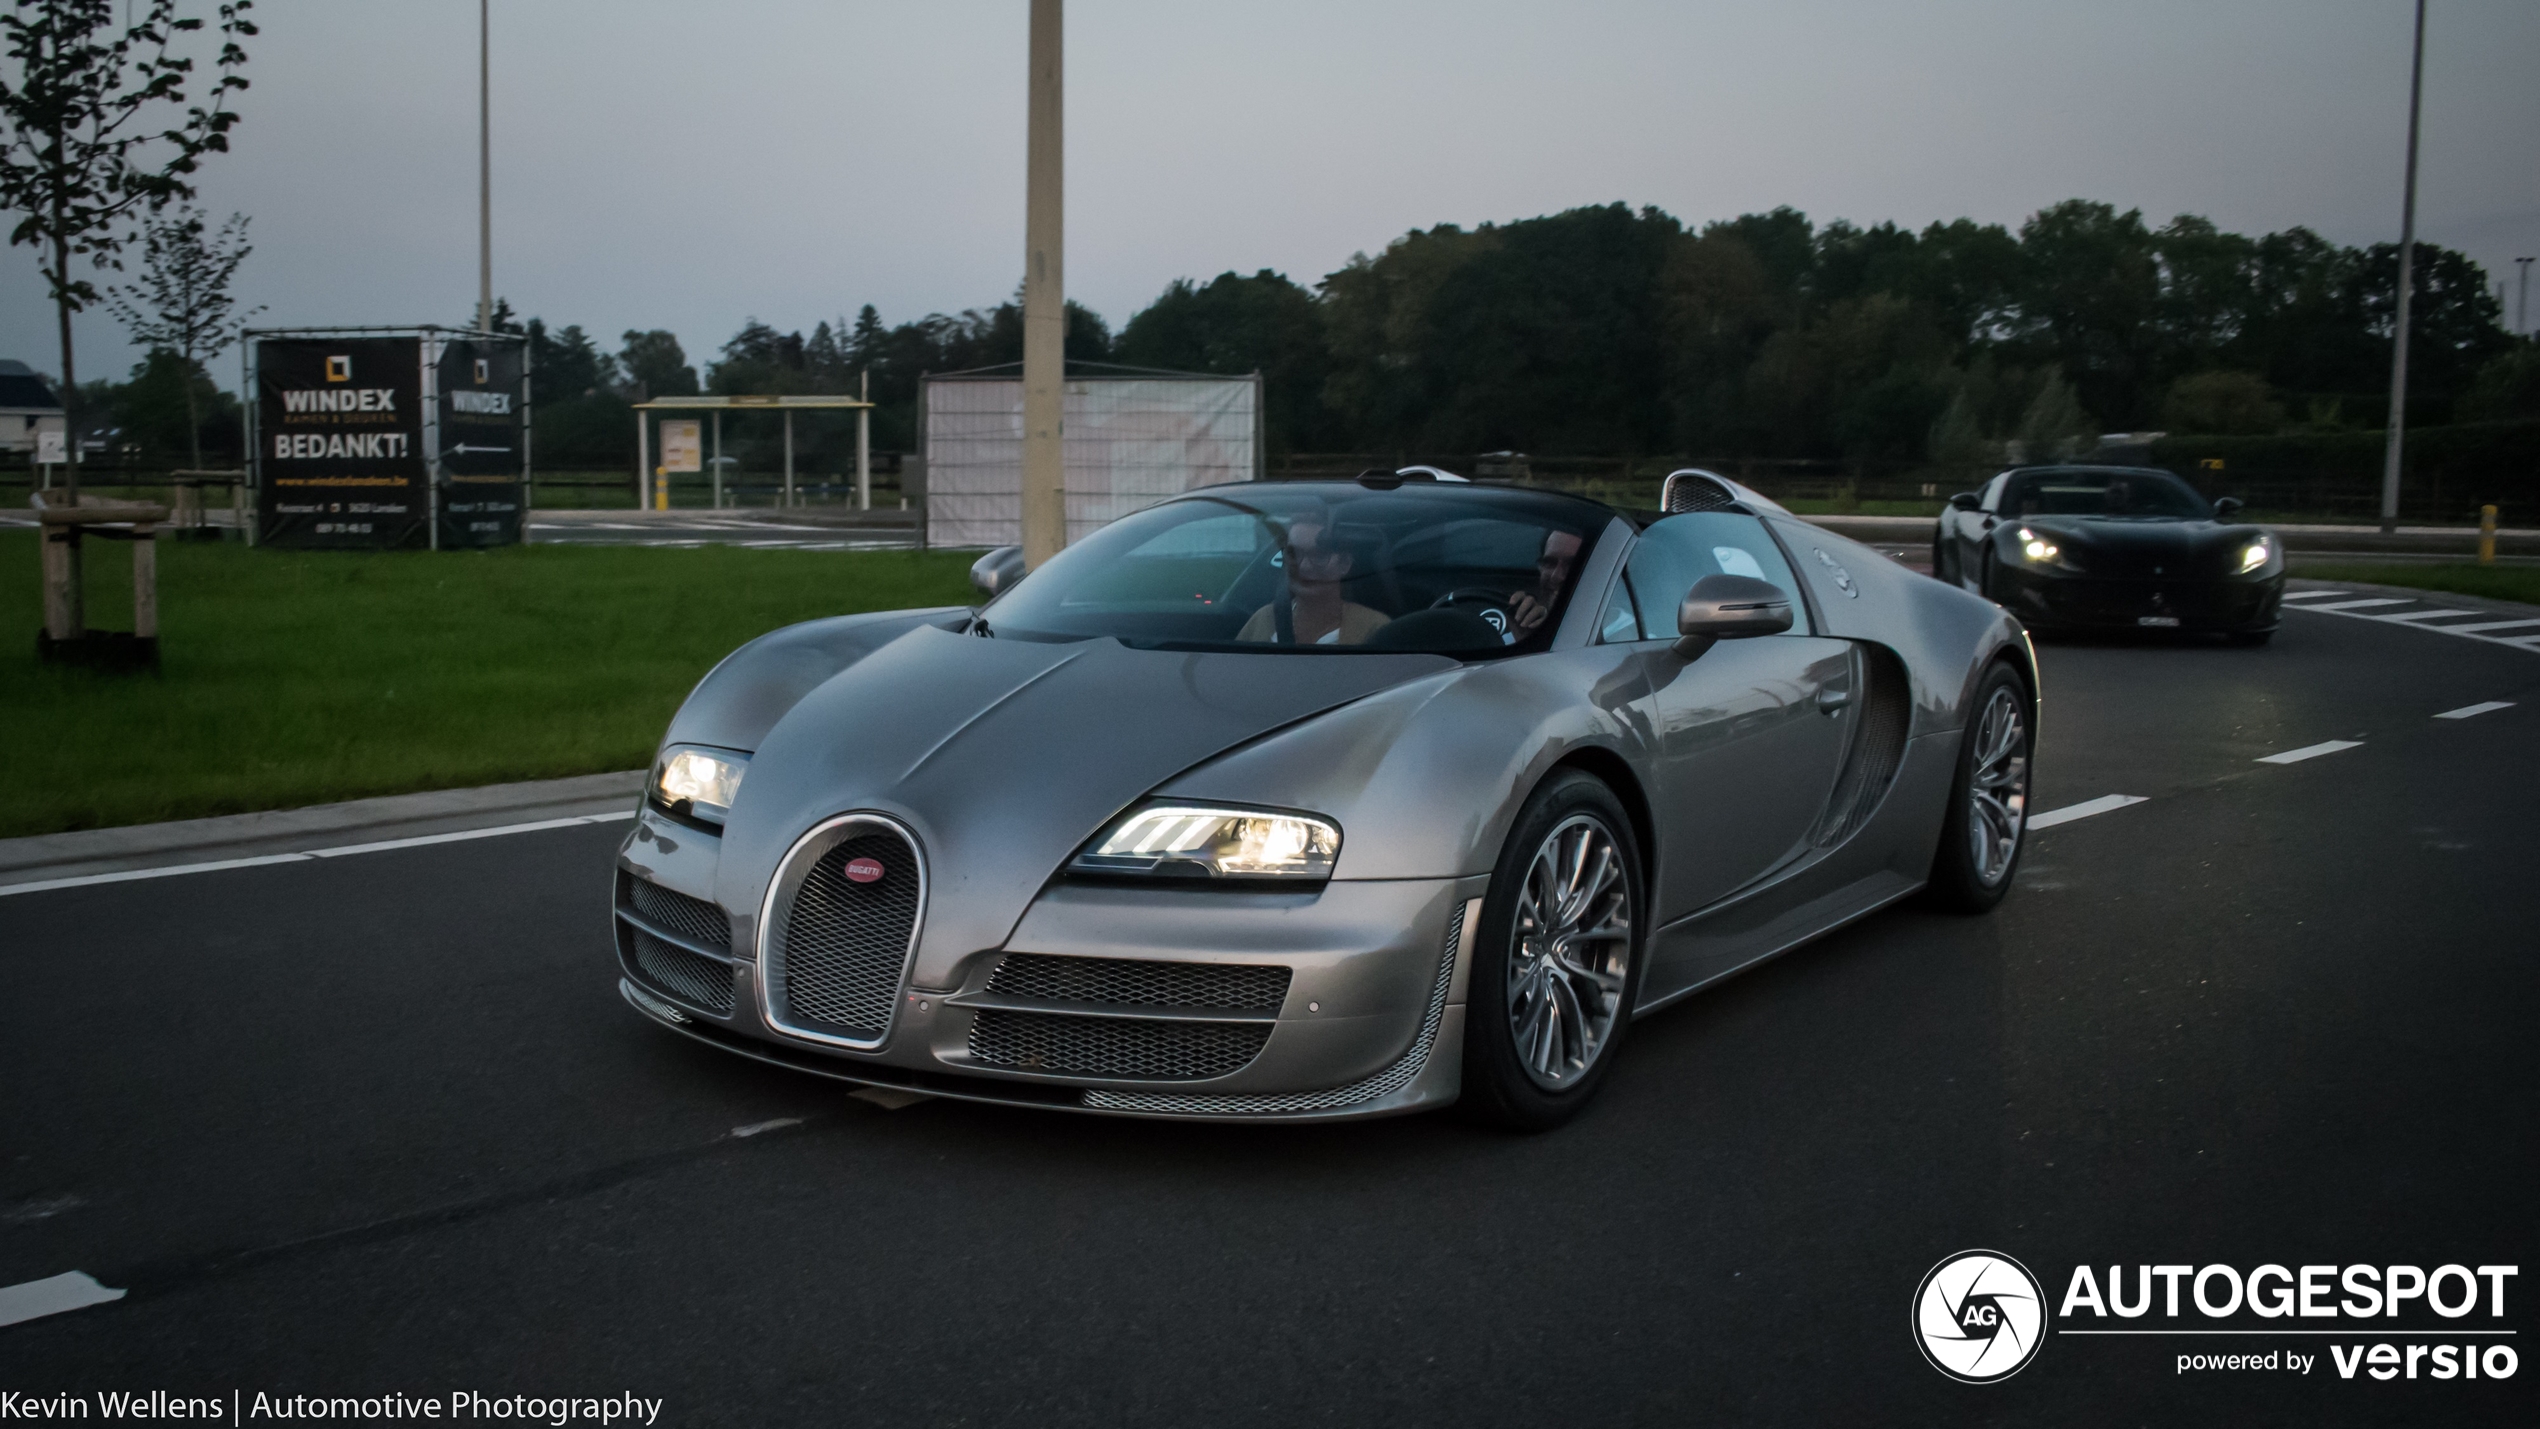 A beautiful Veyron Grand sport Vitesse shows up in Lanaken